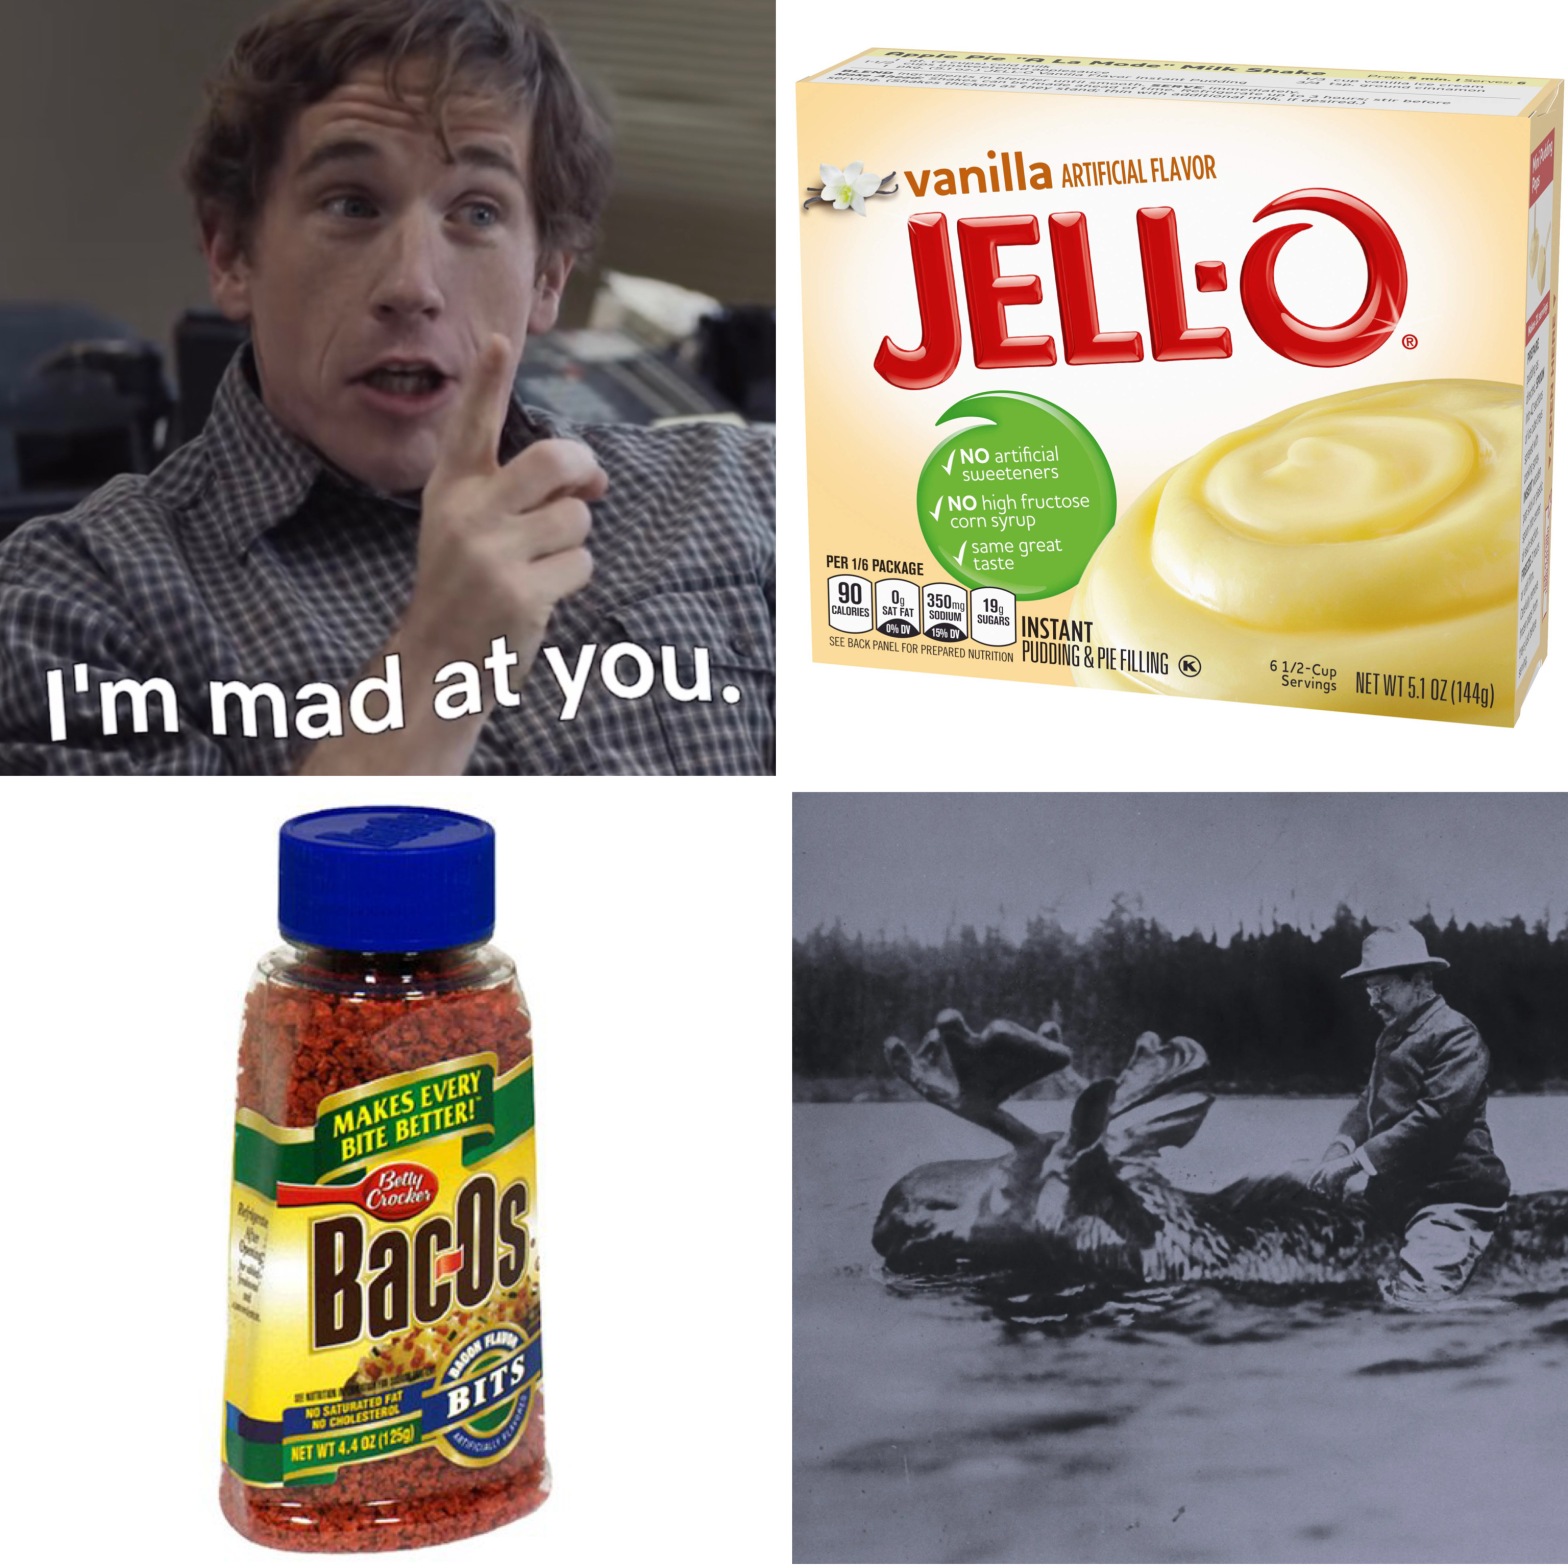 Conner O'Malley being upset in I Think You Should Leave, a box of instant Jell-O pudding, a bottle of Bac-O's Bacon Bits, and Teddy Roosevelt riding a moose through a river.